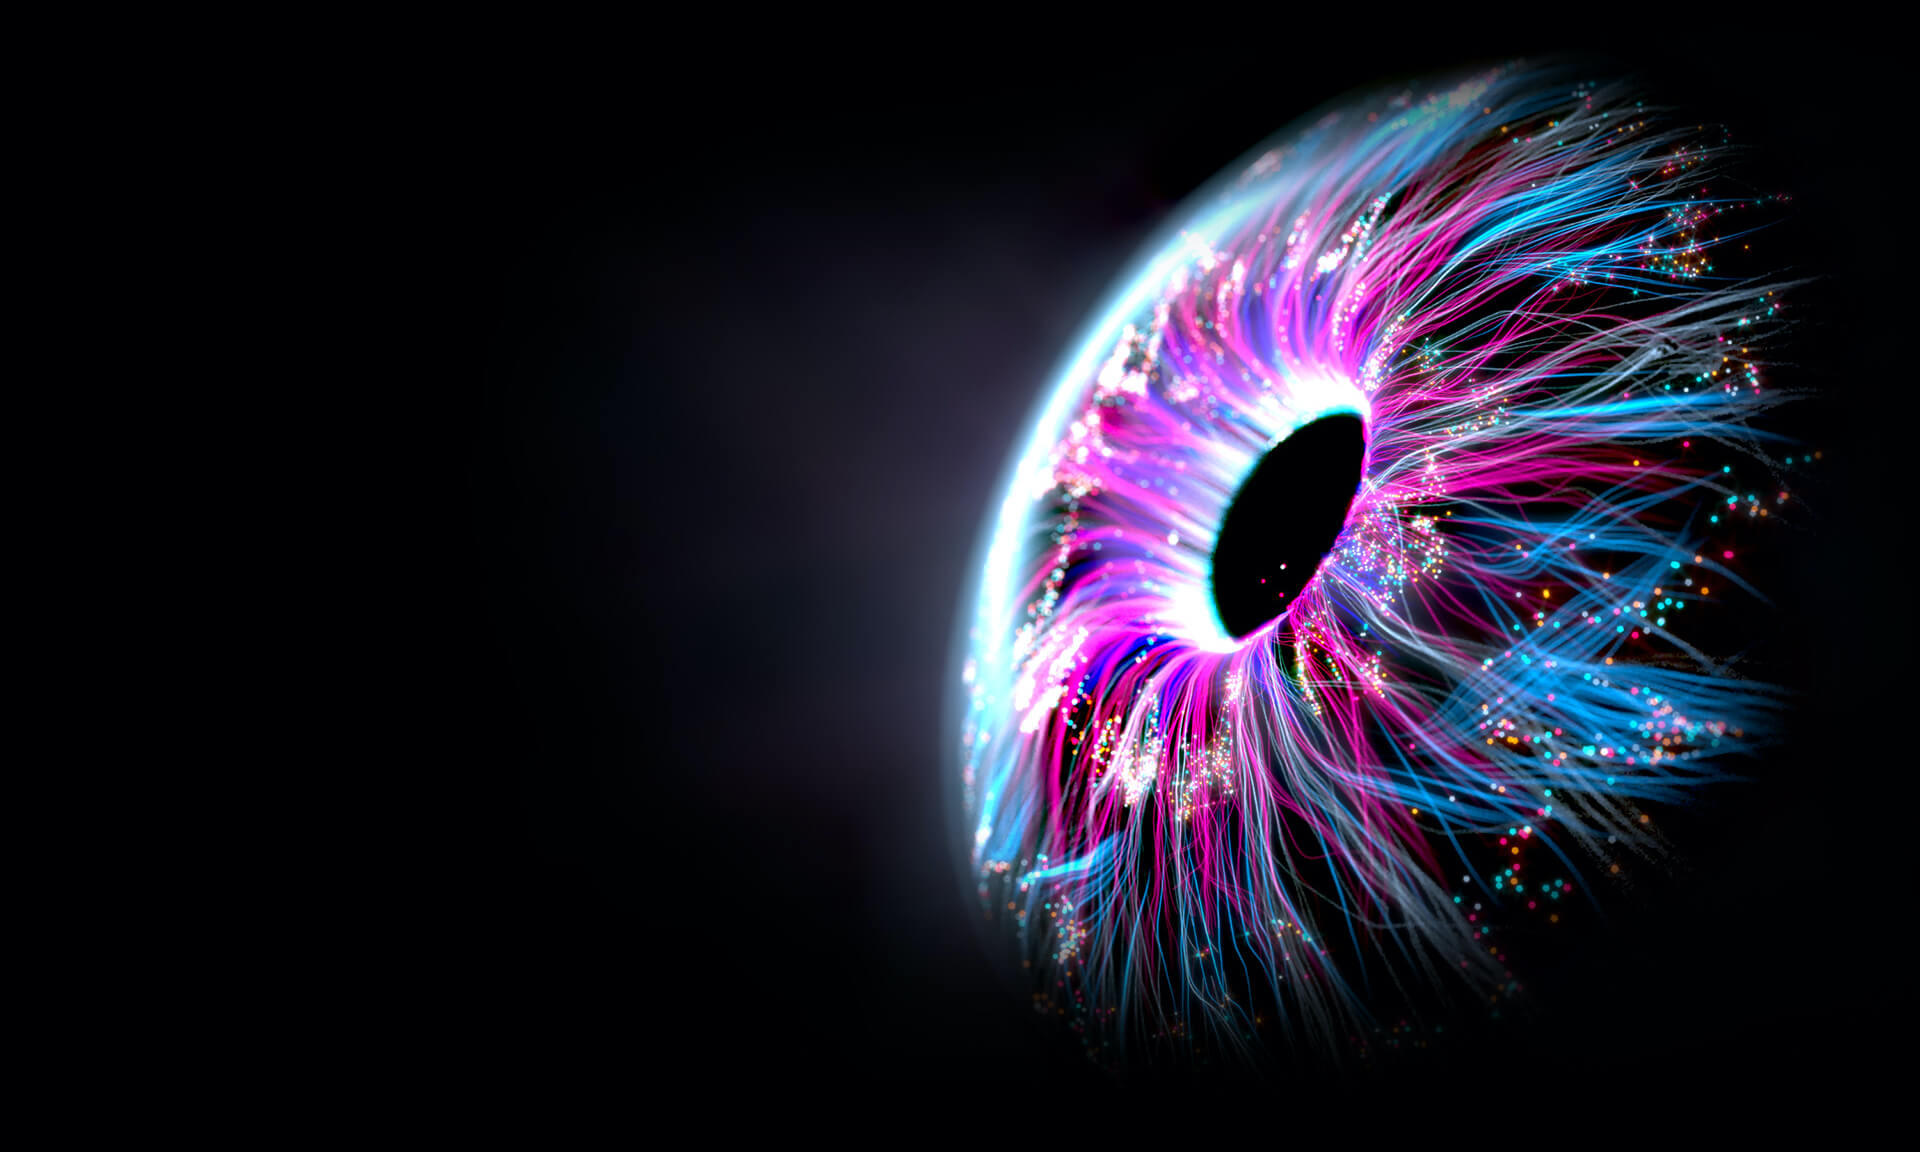 A close-up image of a human eye with streams of blue and purple light flowing from it